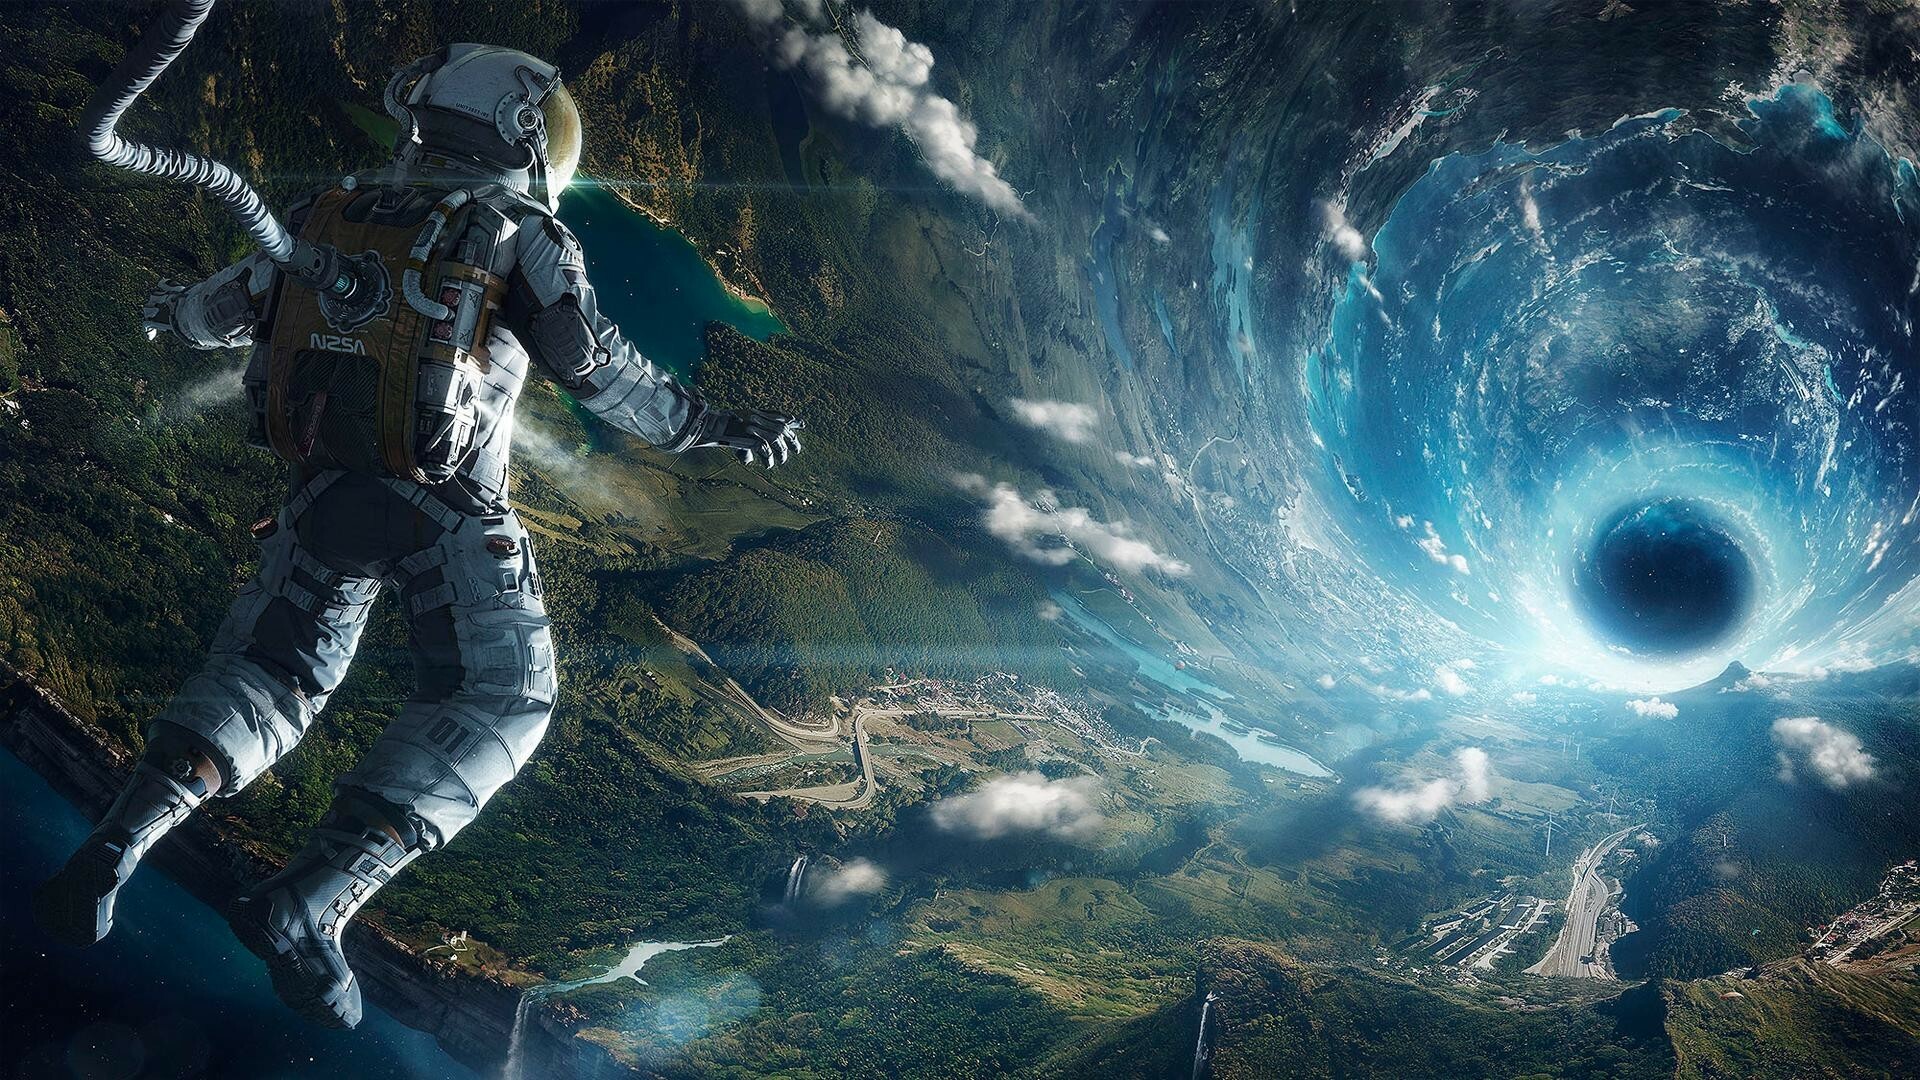 Outer Space: Quantum physics, Dimensional, Astronaut, Gravity, Atmosphere. 1920x1080 Full HD Wallpaper.